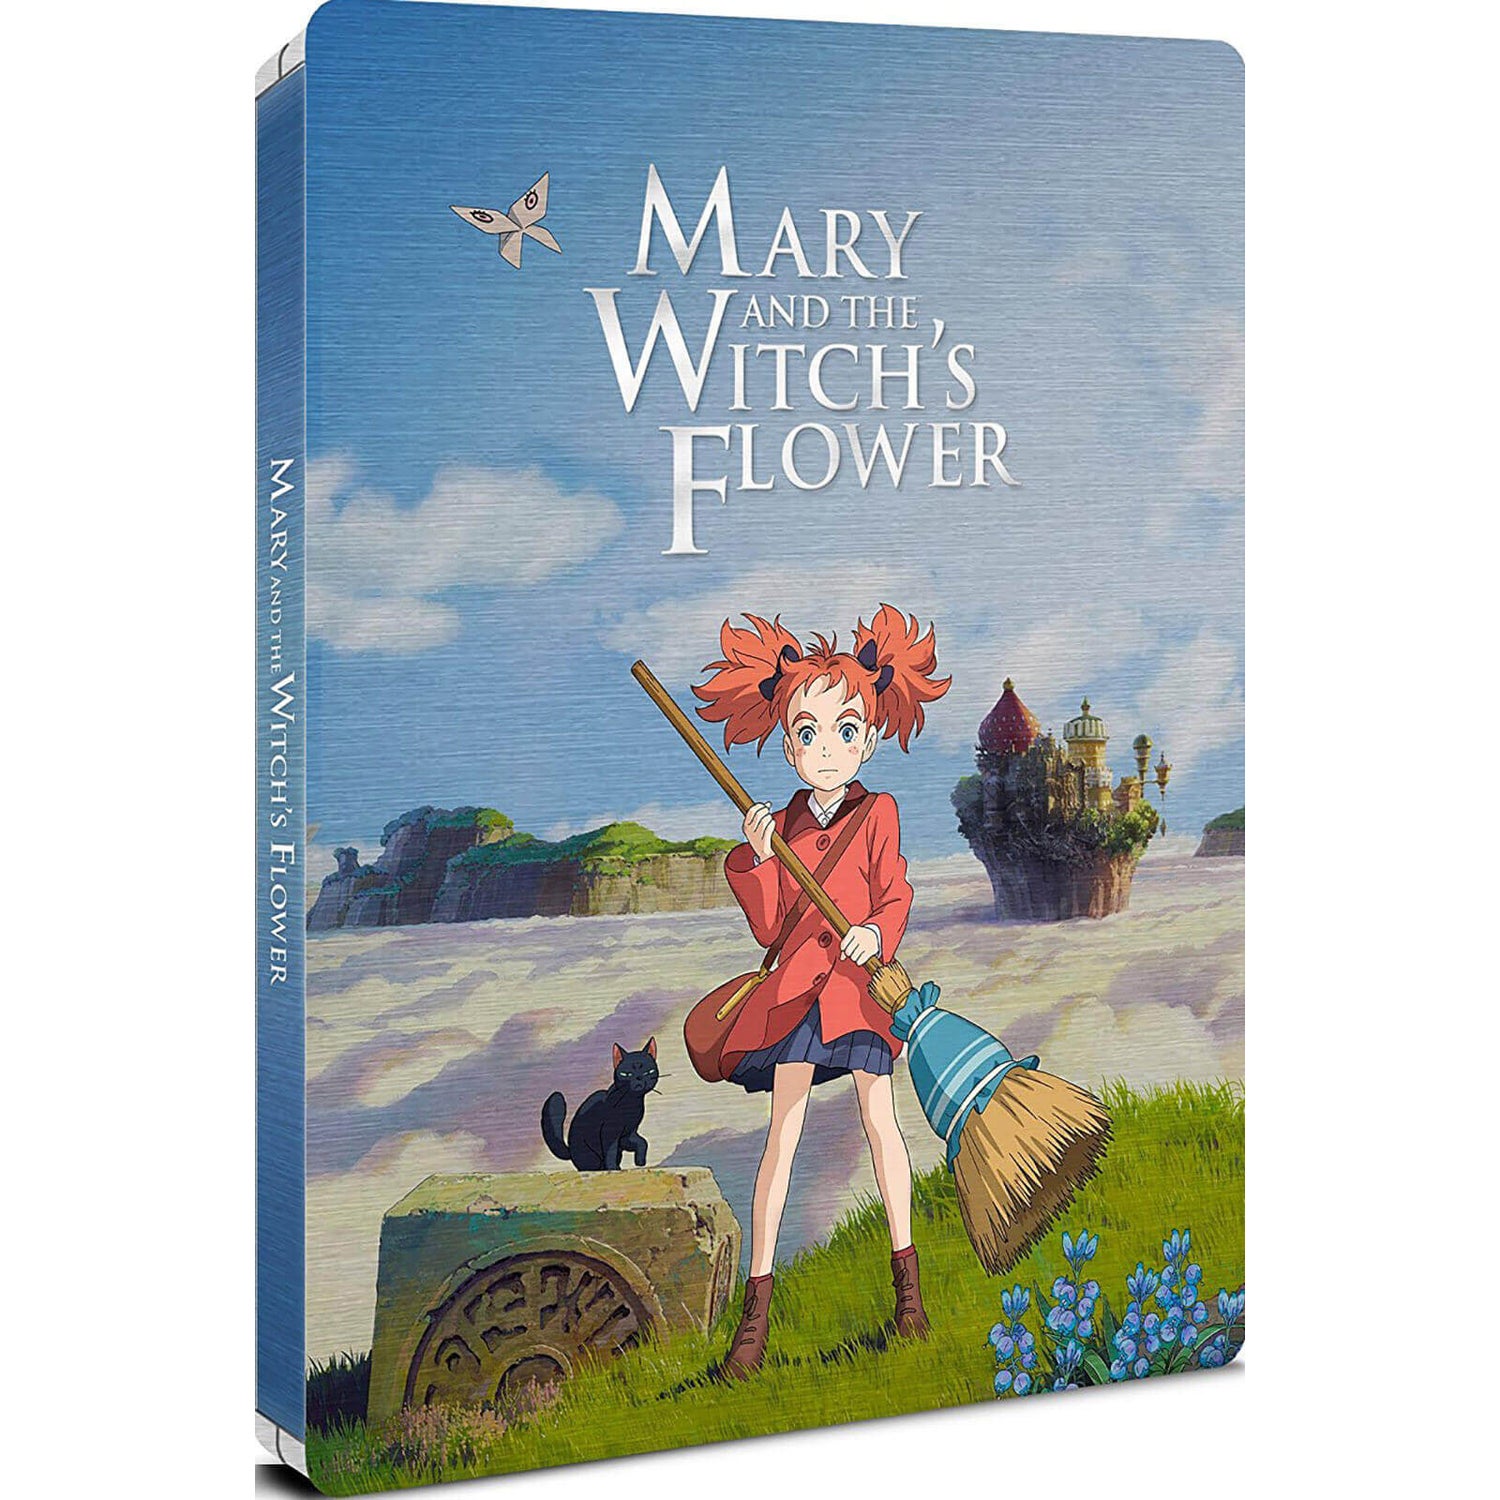 Mary witchflower - nude photos